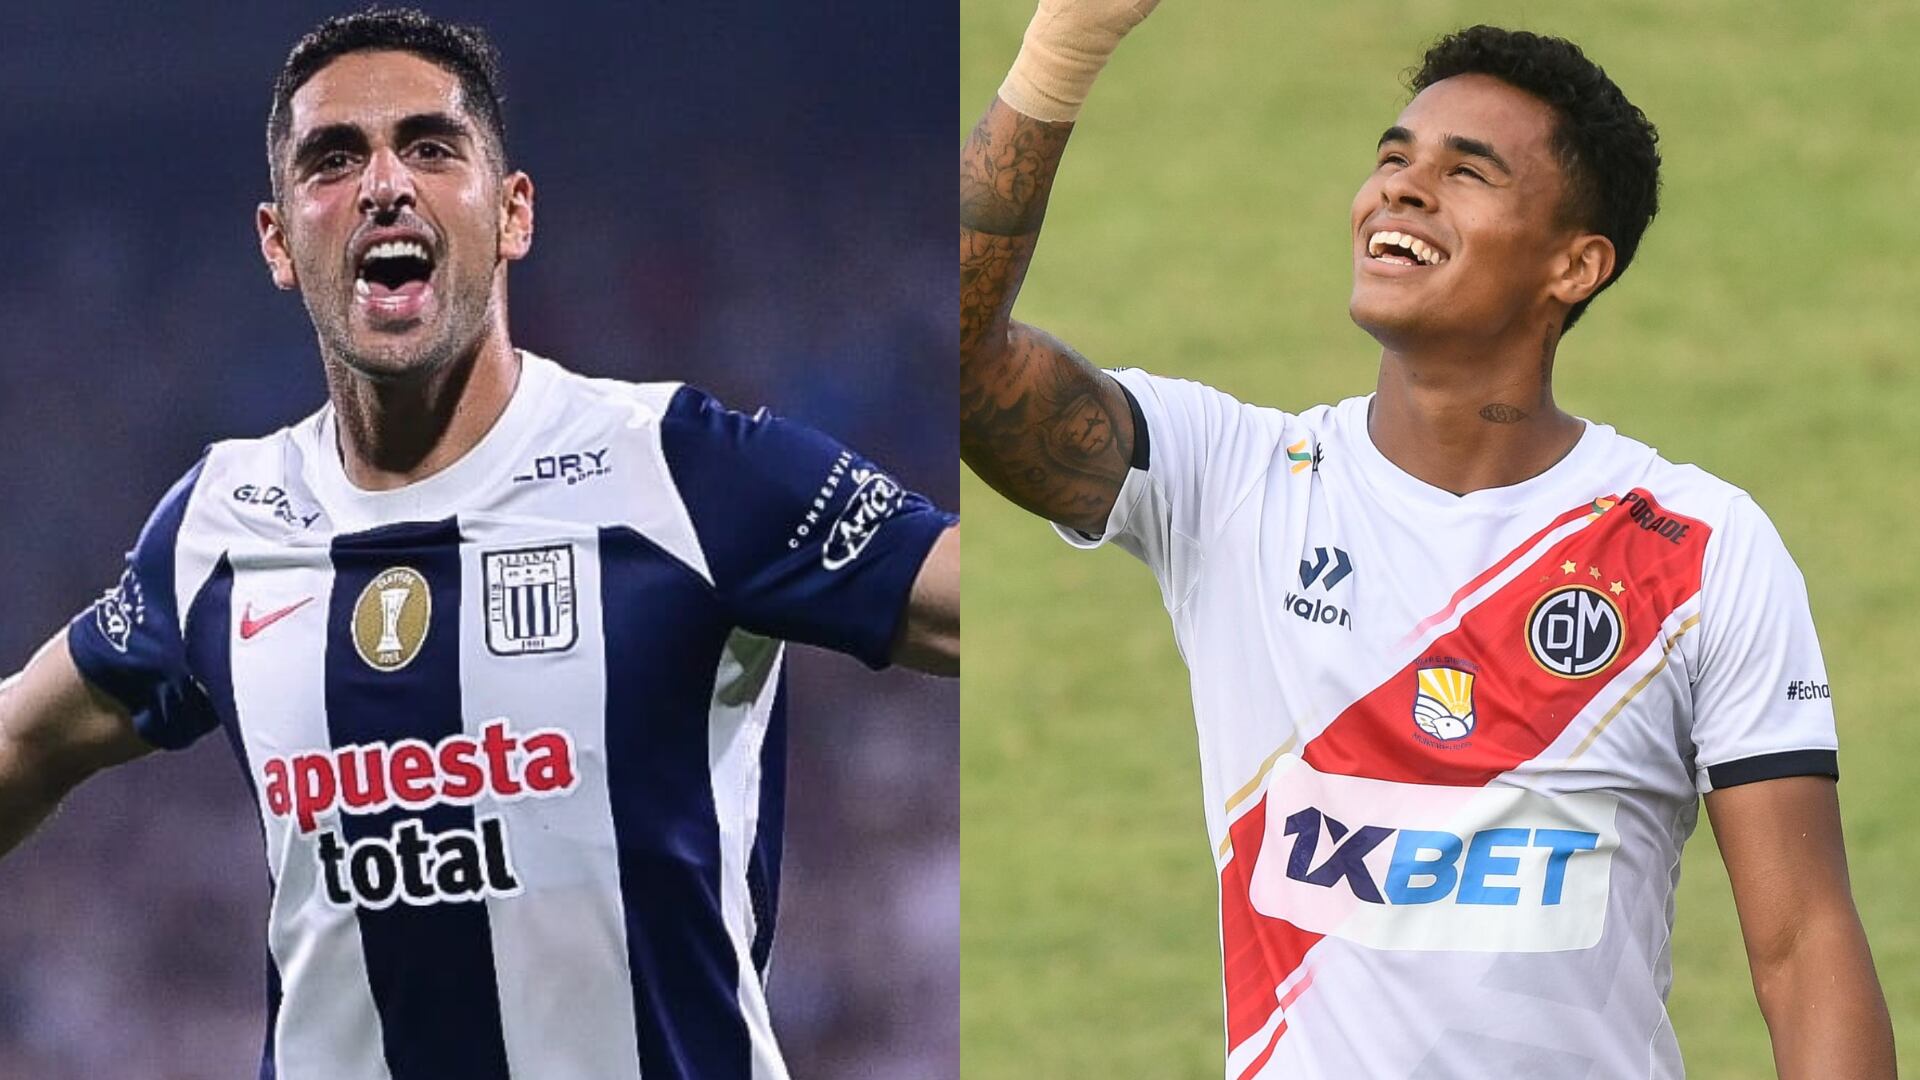 Pablo Sabbag vs Christopher Olivares will be the scorers duel in Alianza Lima vs Deportivo Municipal in the match for date 2 of the Liga 1 Opening Tournament.